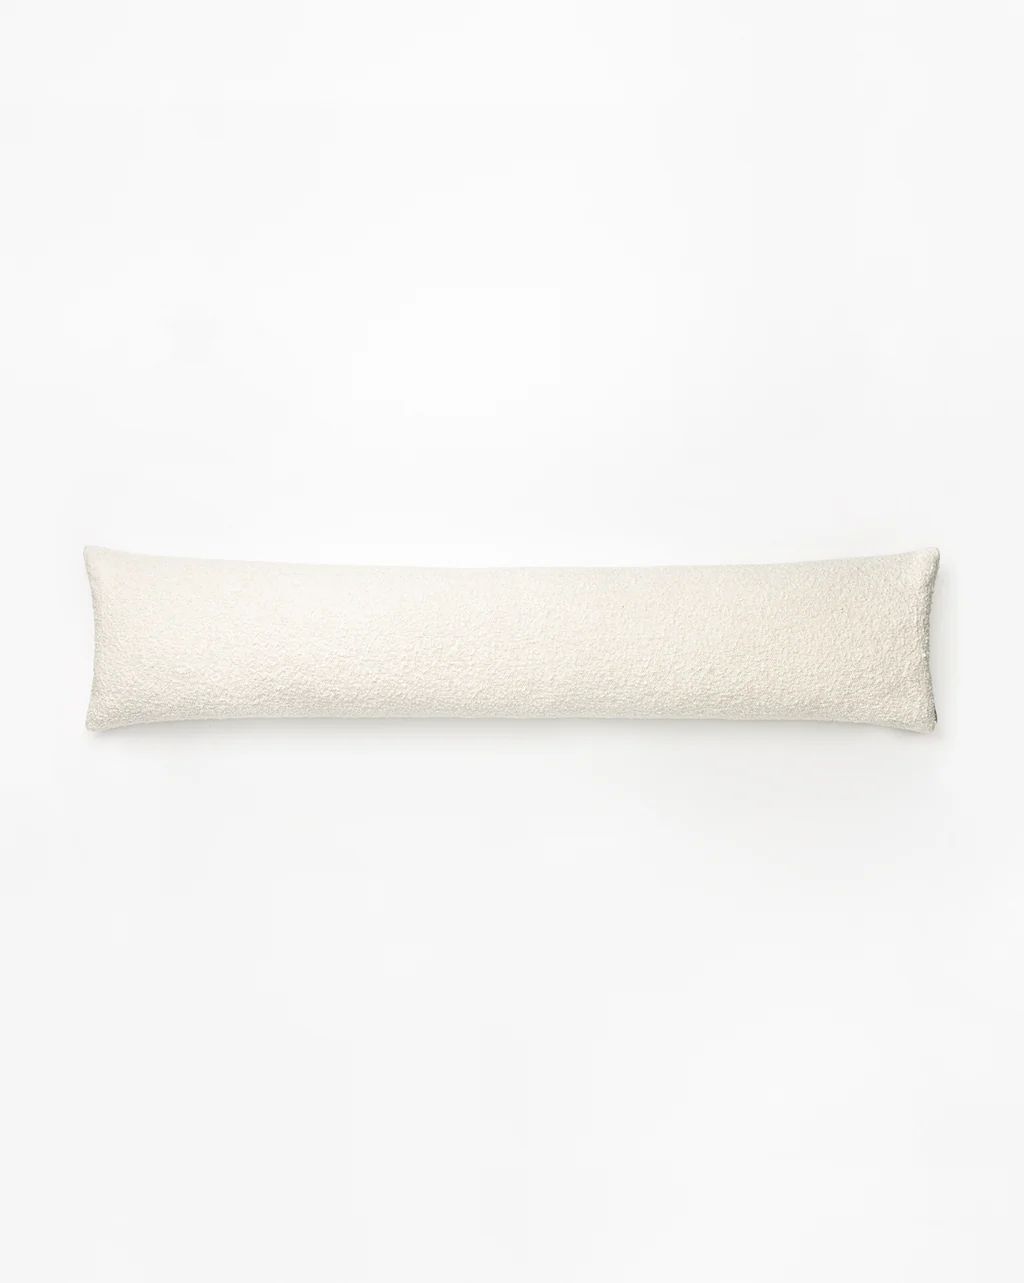 Shepard Pillow Cover | McGee & Co.